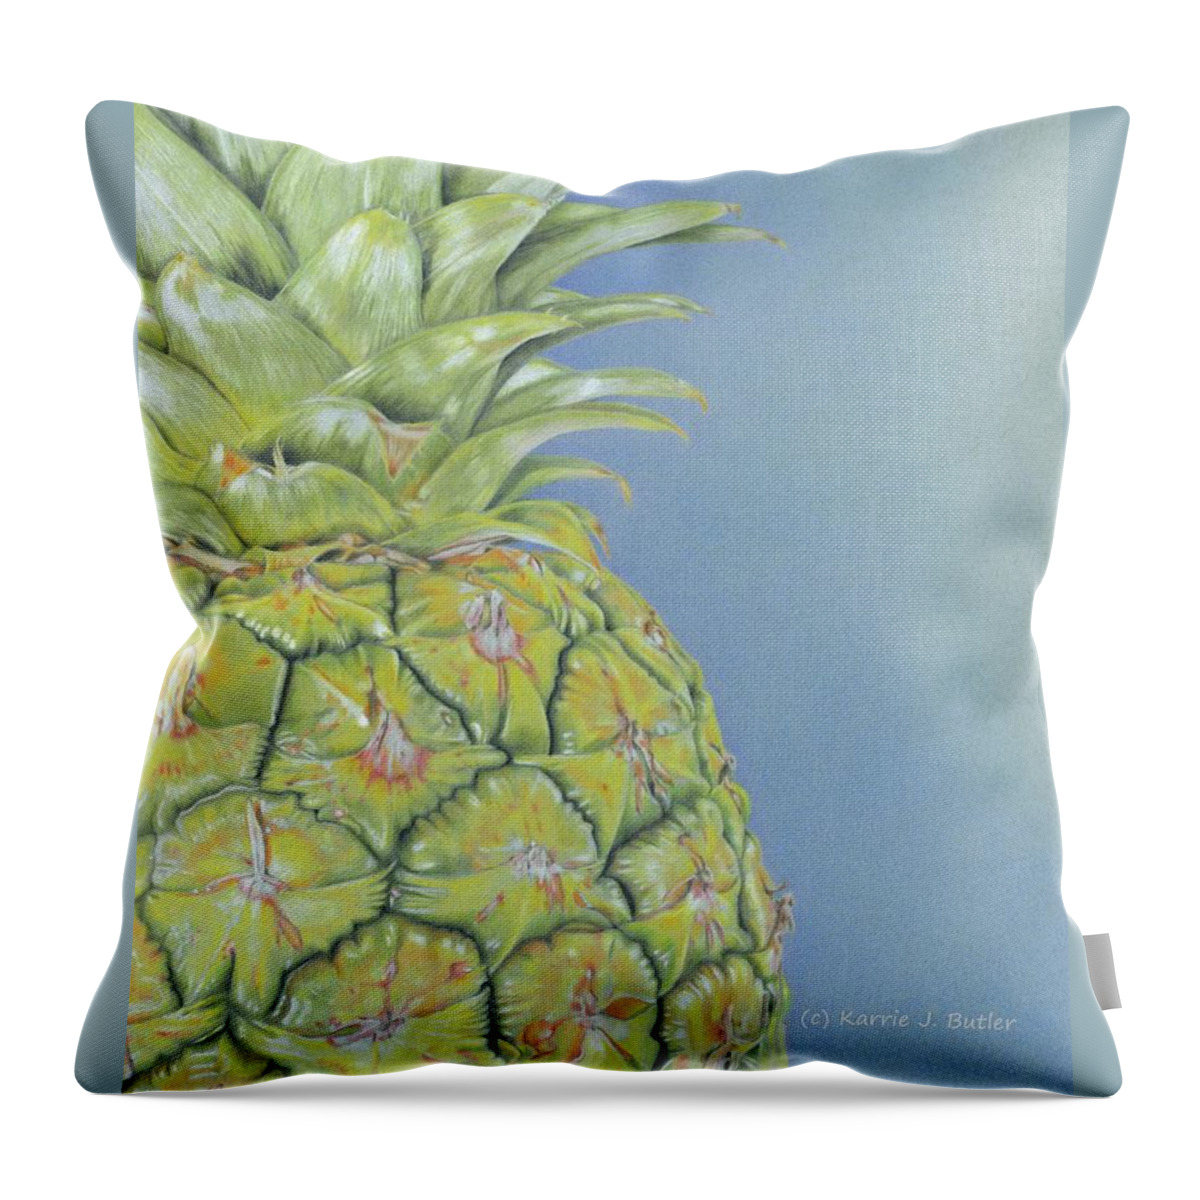 Pineapple Throw Pillow featuring the painting Hawaiian Pineapple by Karrie J Butler